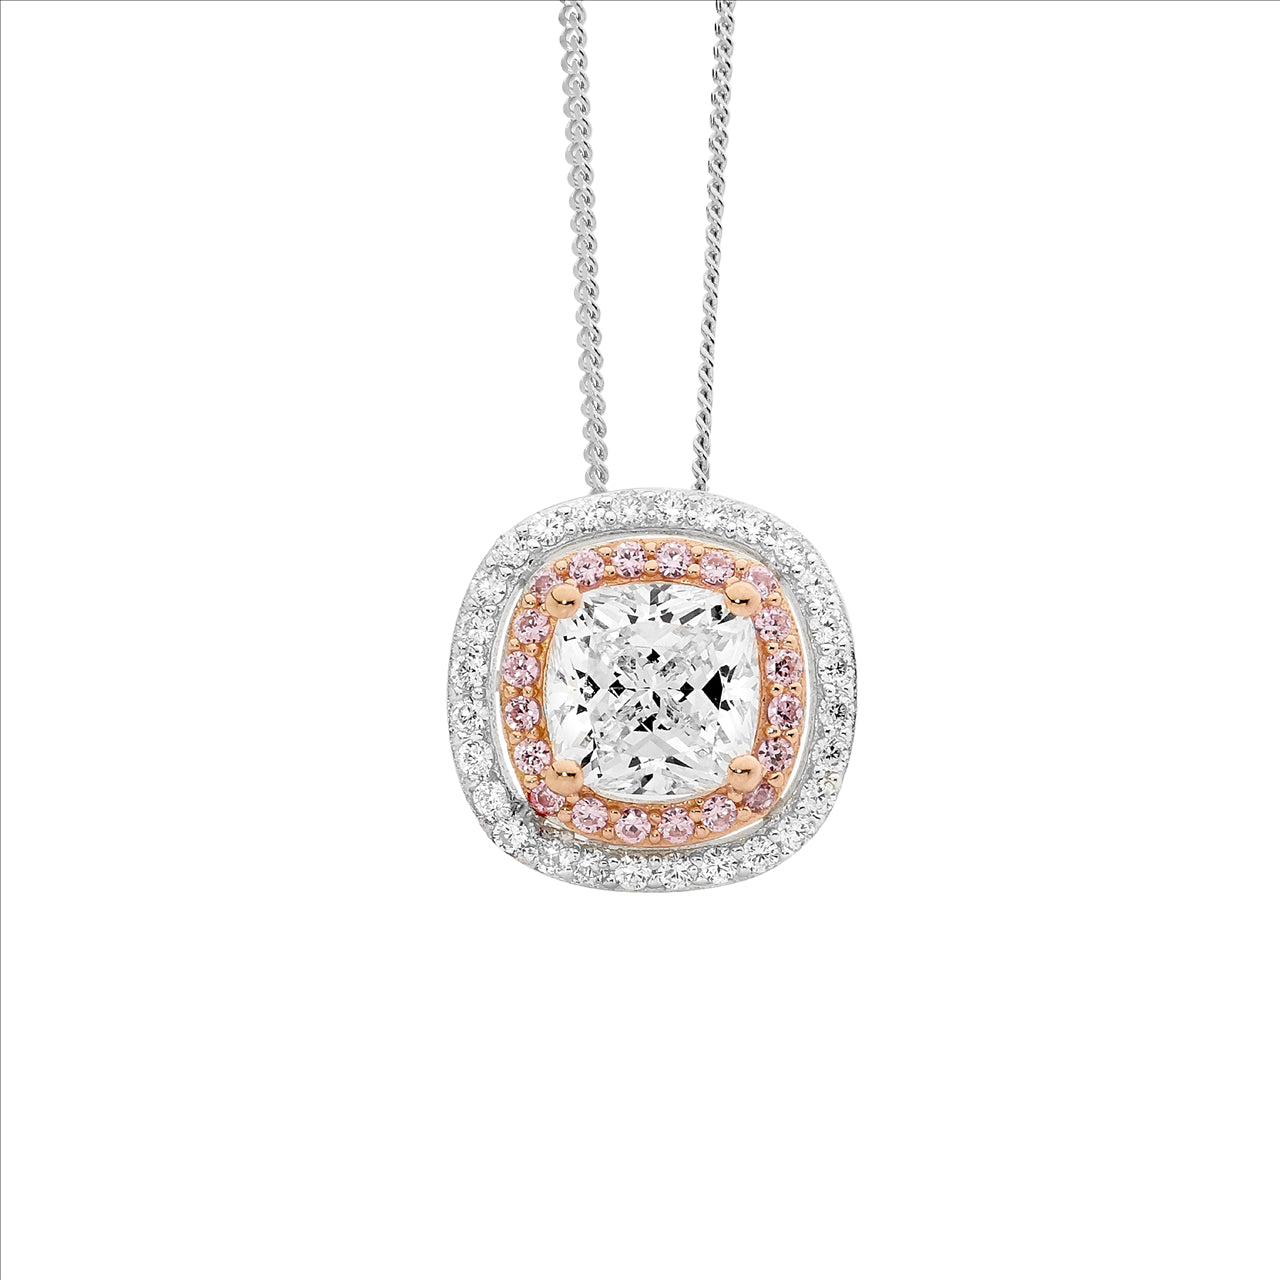 Pendant - Sterling silver/Rose gold plate Cushion cut Cubic Zirconia in halo setting